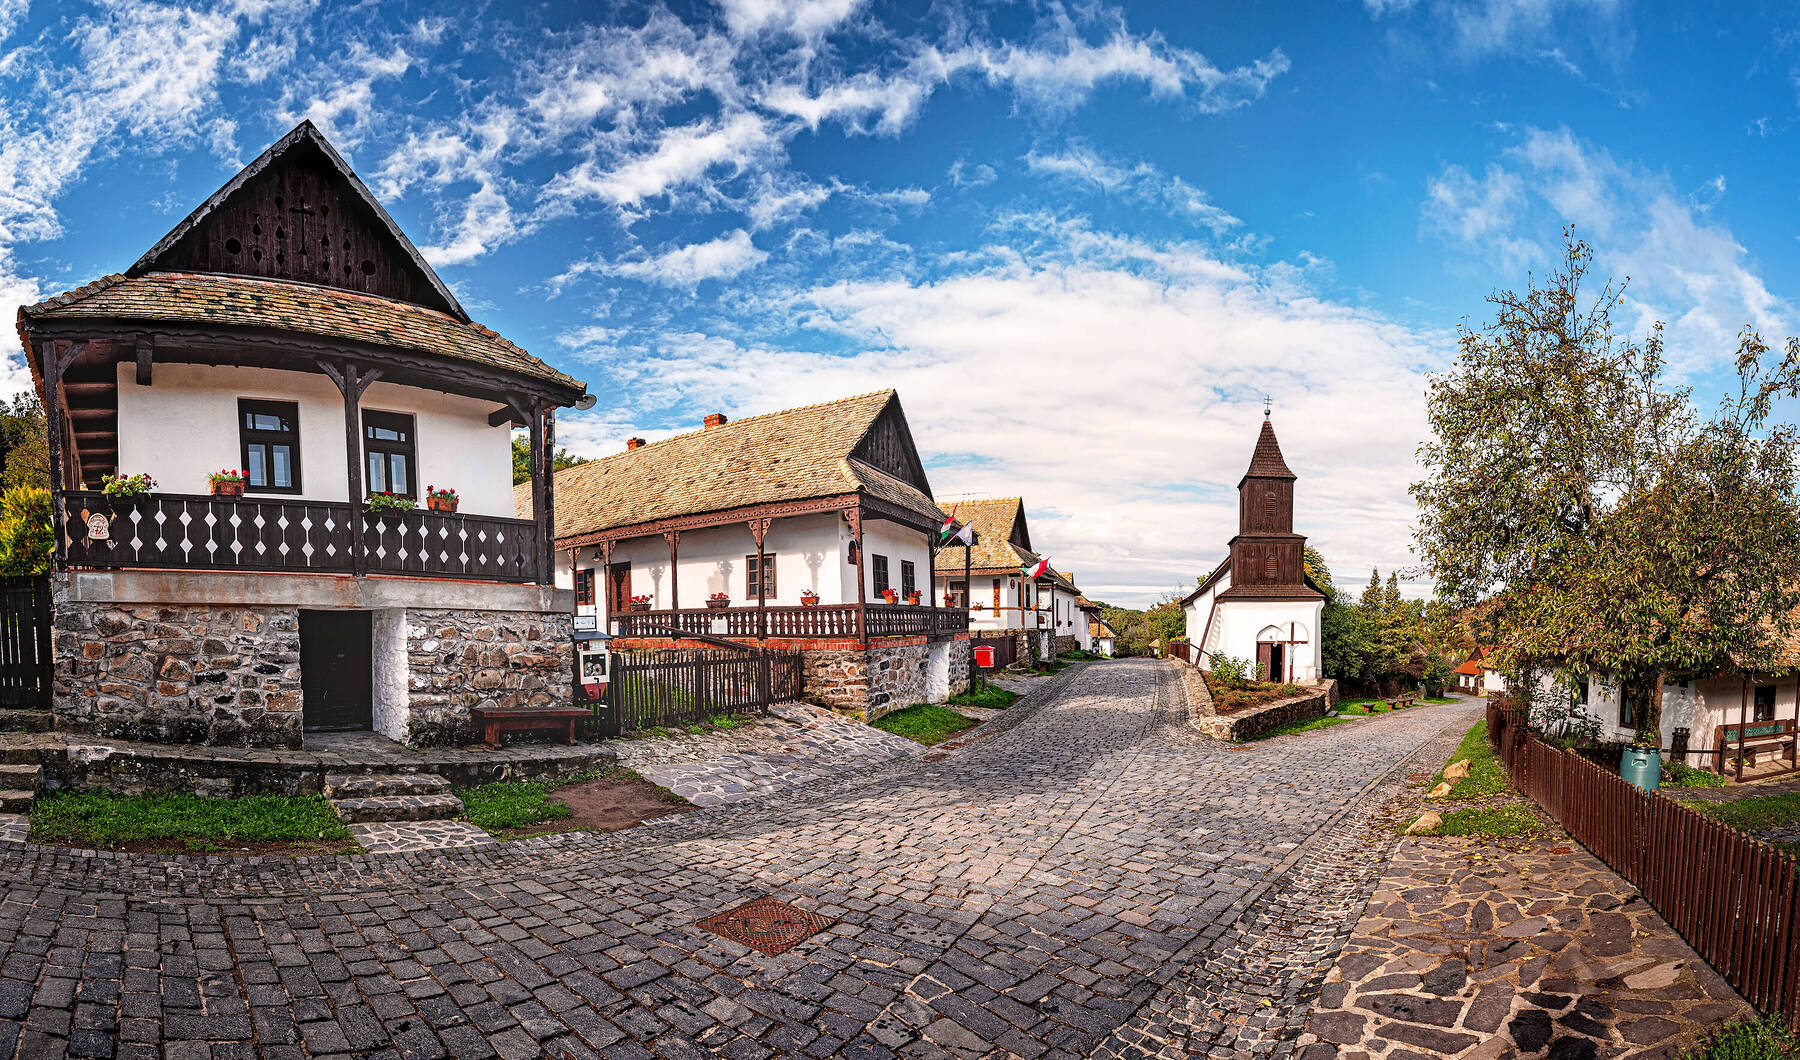 Discover the old village of Hollókő in Hungary